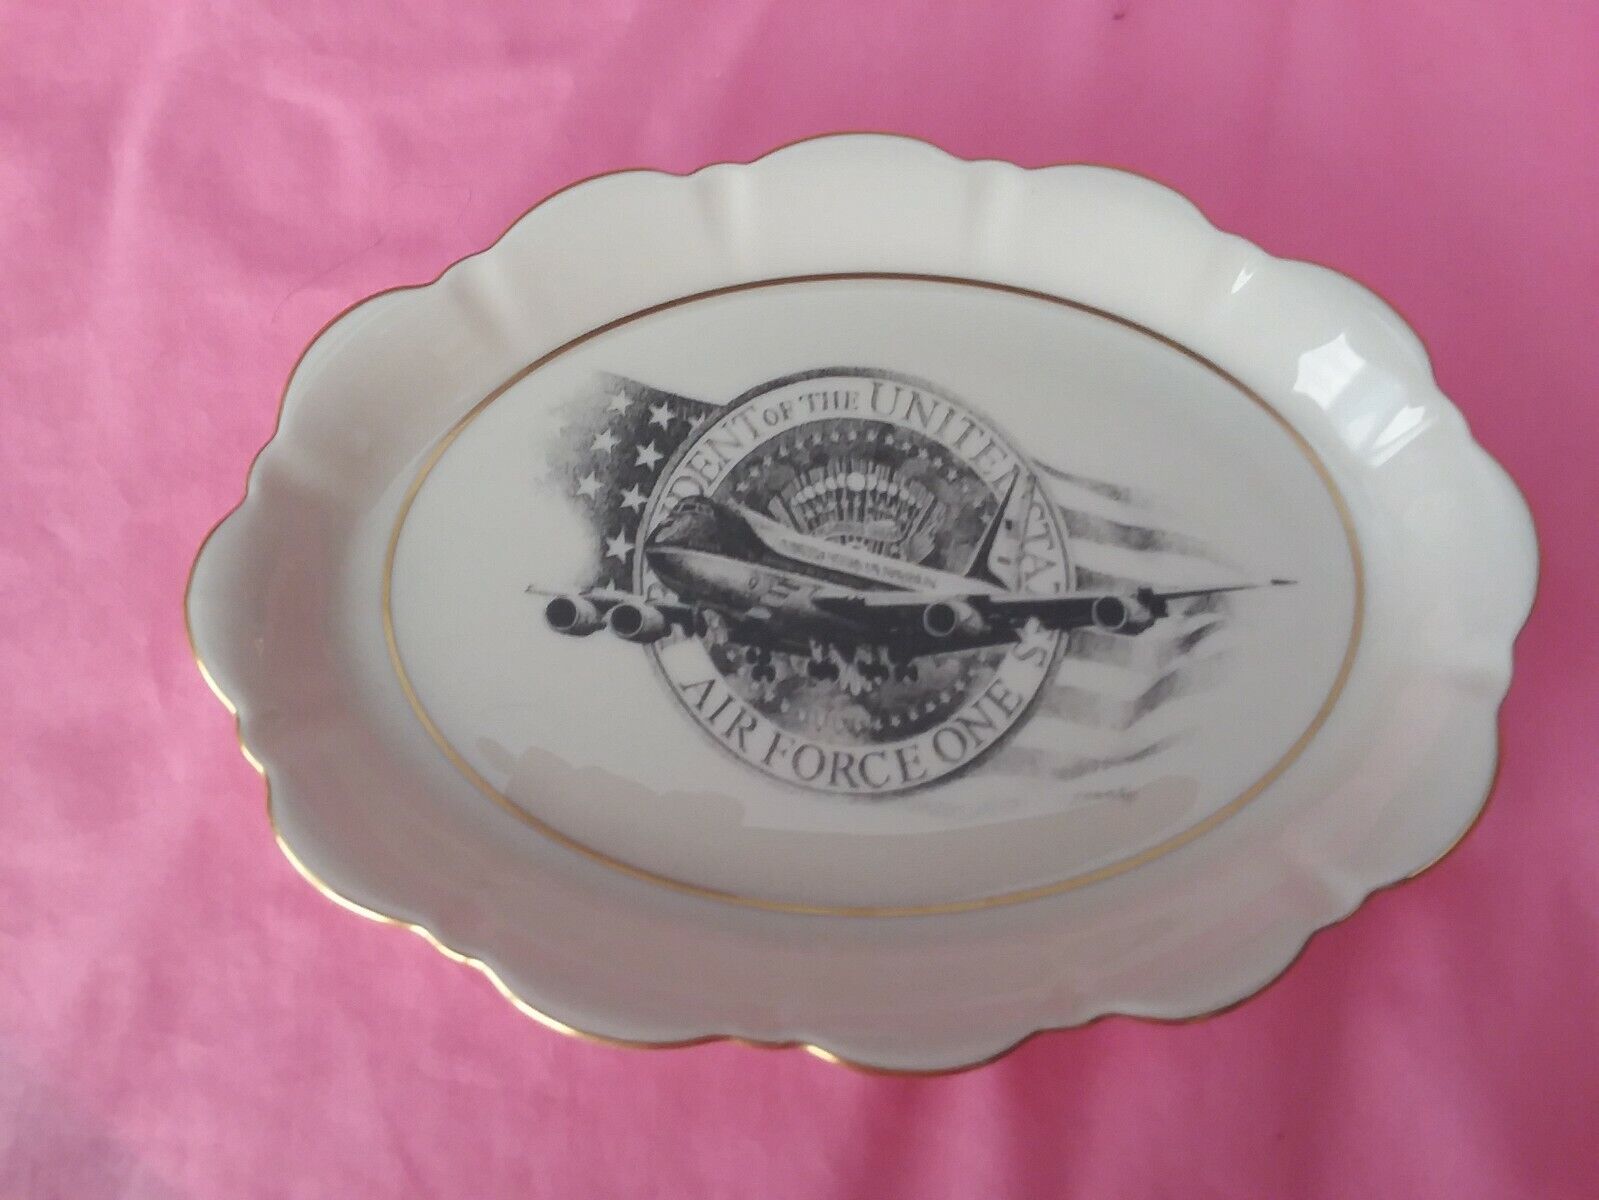 Presidential Air Force One White House Pickard China USA Retired Pilot Art